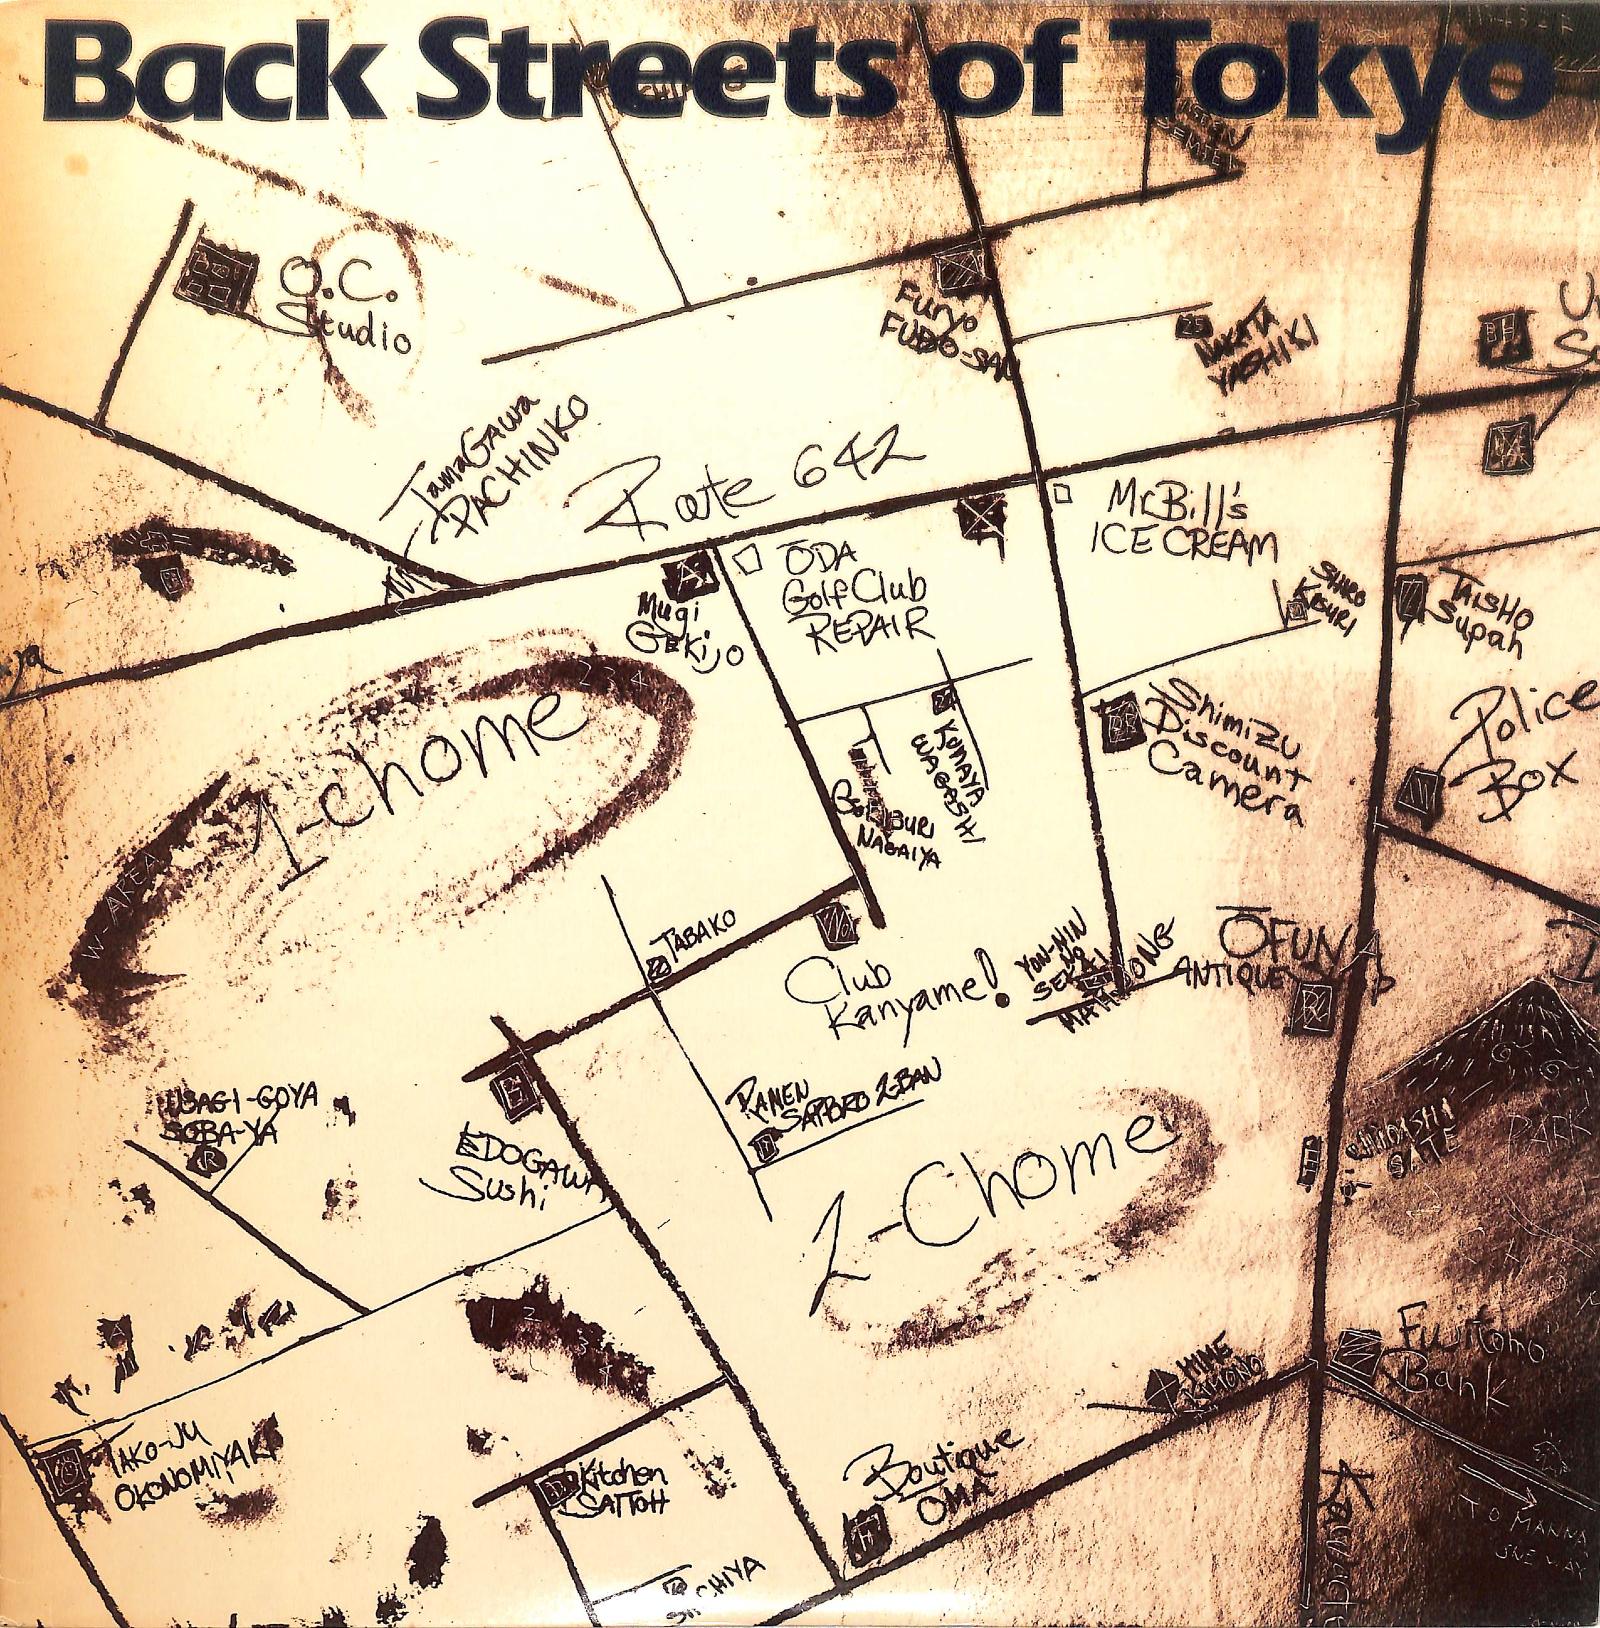 OFF COURSE - Back Streets Of Tokyo